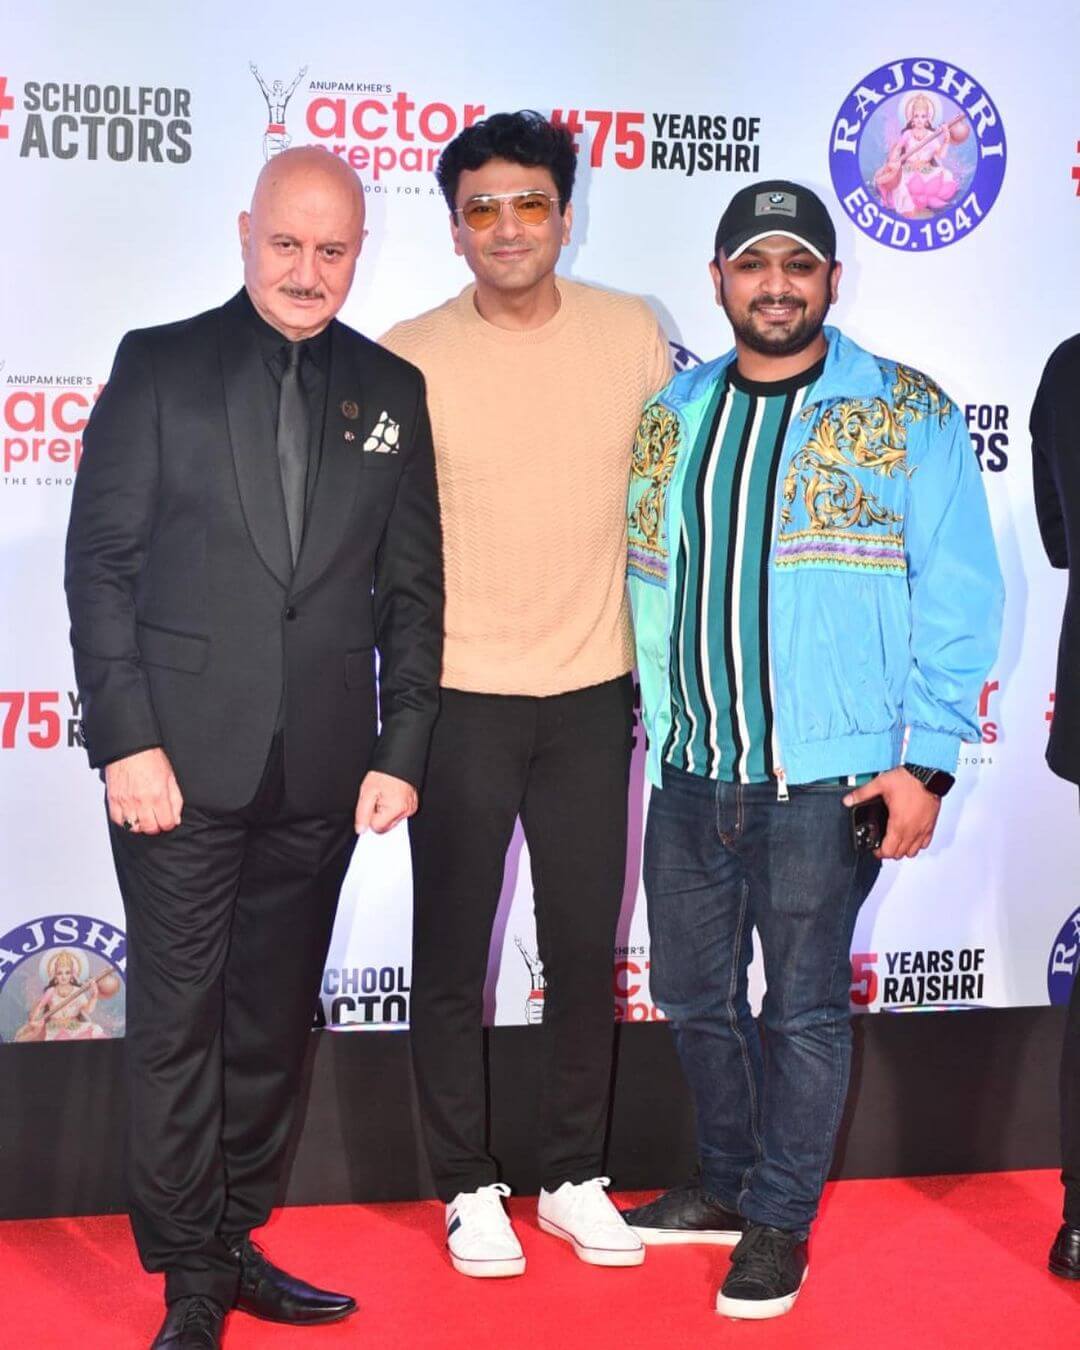 Anupam Kher Welcomes Stunning stars of bollywood industry at uunchai movie premiere event